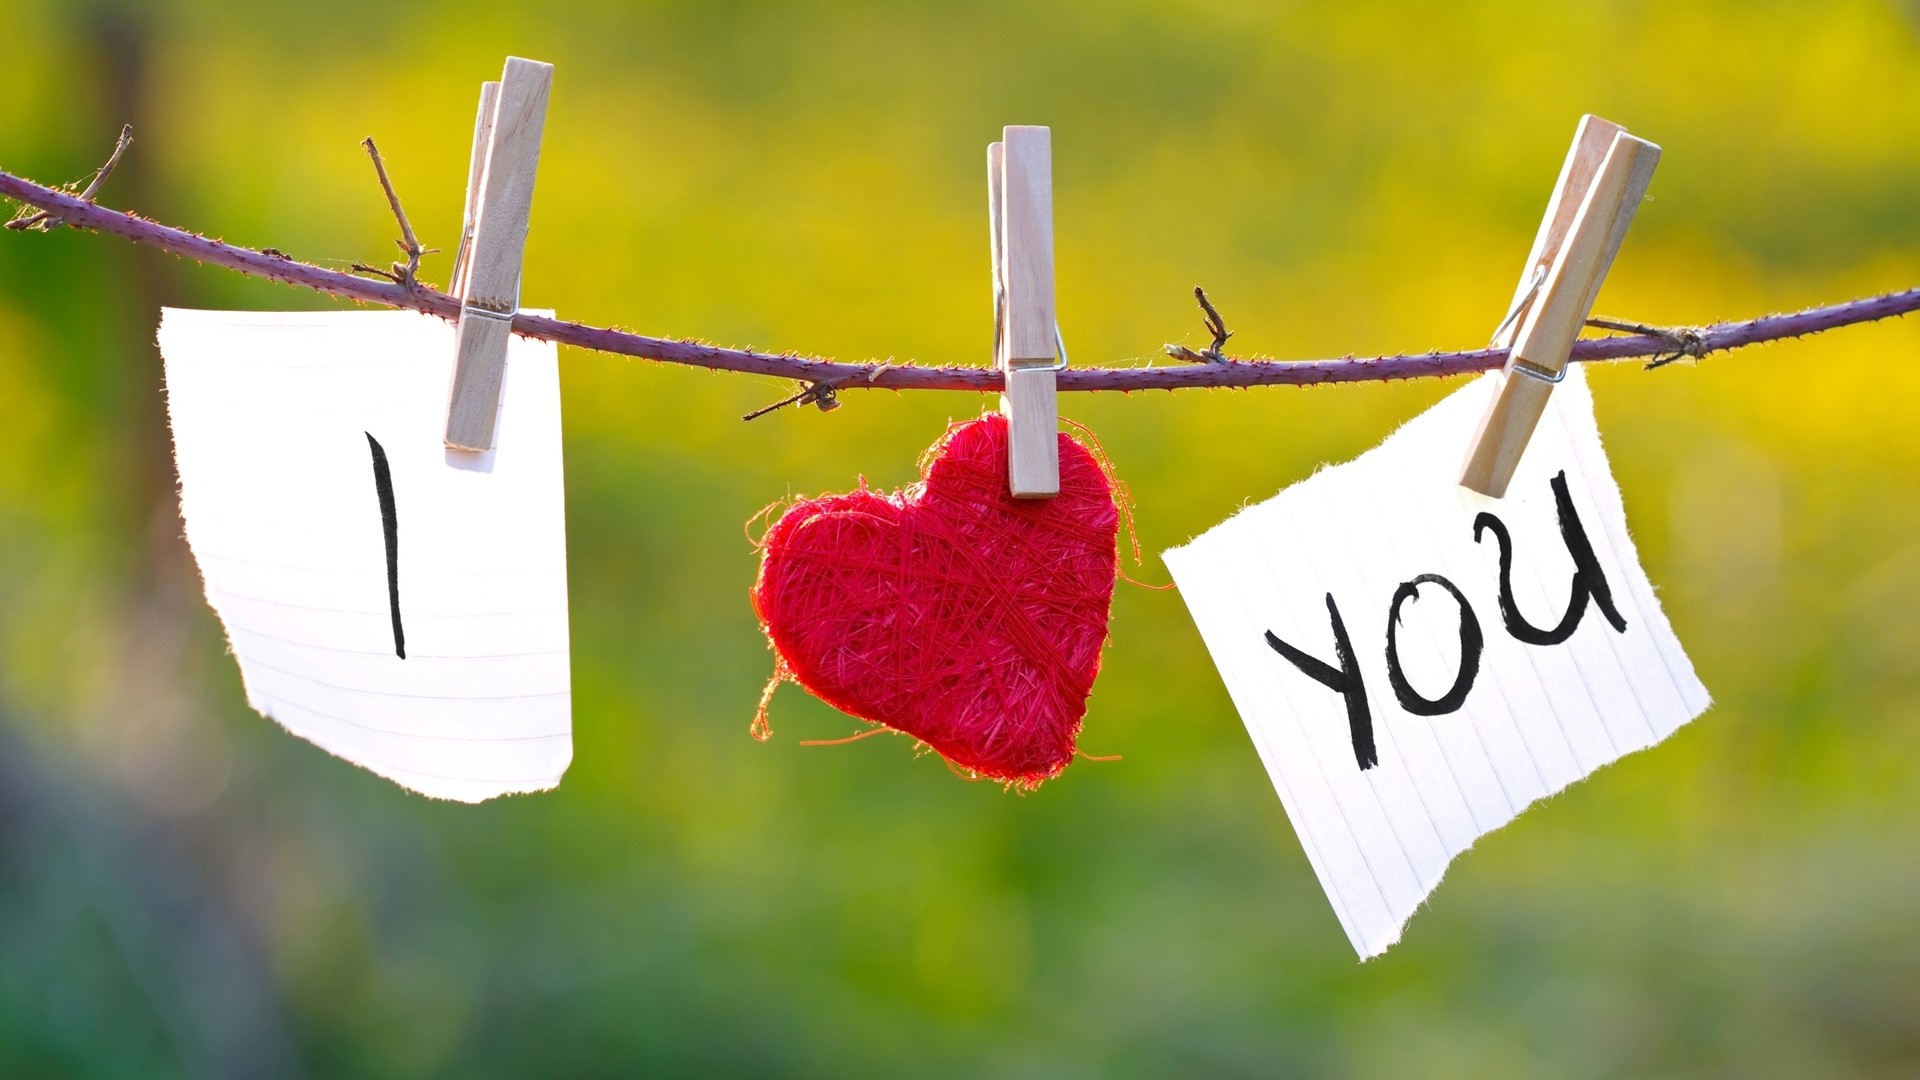 1920x1080 I Love You HD Images Wallpapers | I Love You Free Download Images